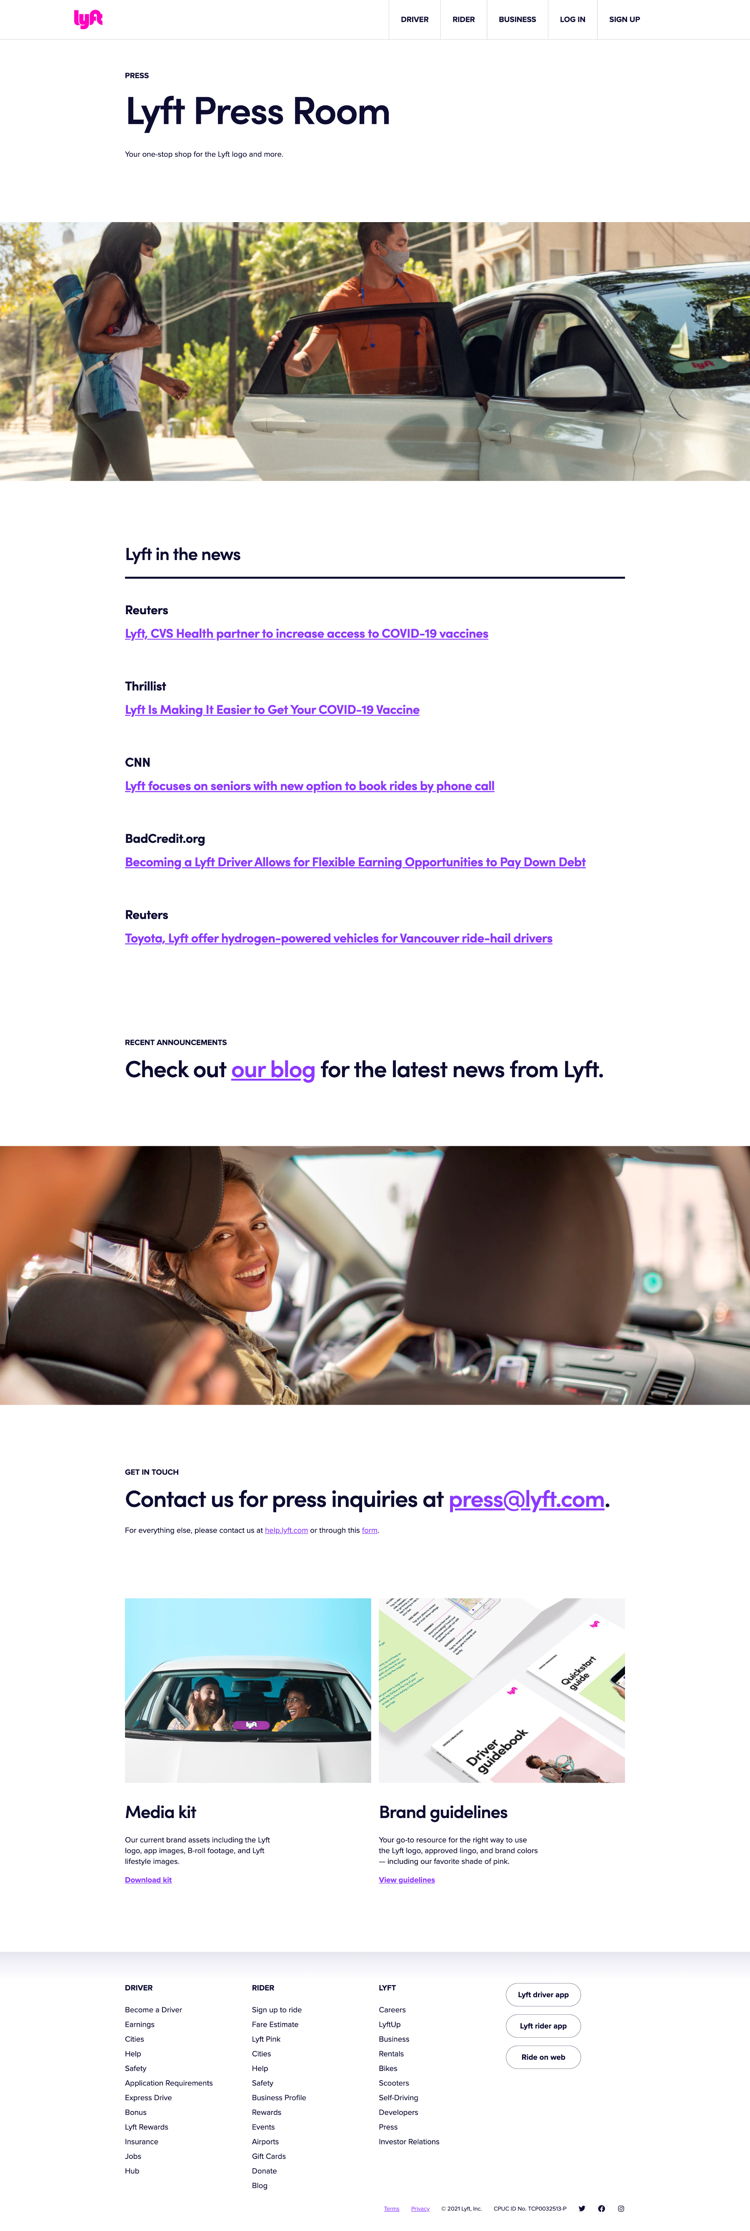 Lyft creates a sense of credibility by placing its top coverage up front